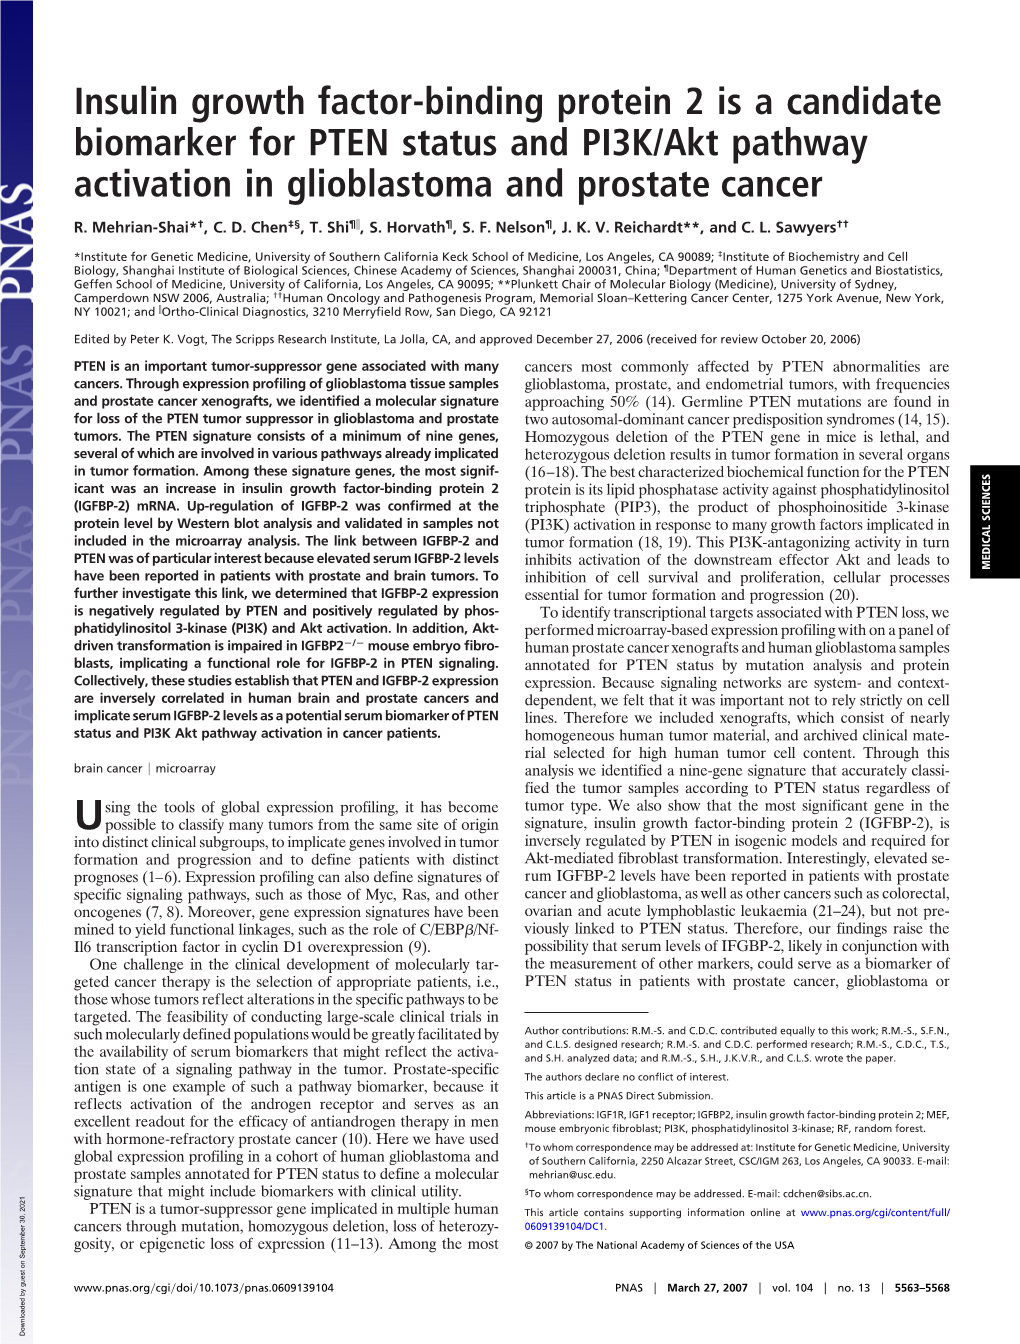 Insulin Growth Factor-Binding Protein 2 Is a Candidate Biomarker for PTEN Status and PI3K/Akt Pathway Activation in Glioblastoma and Prostate Cancer